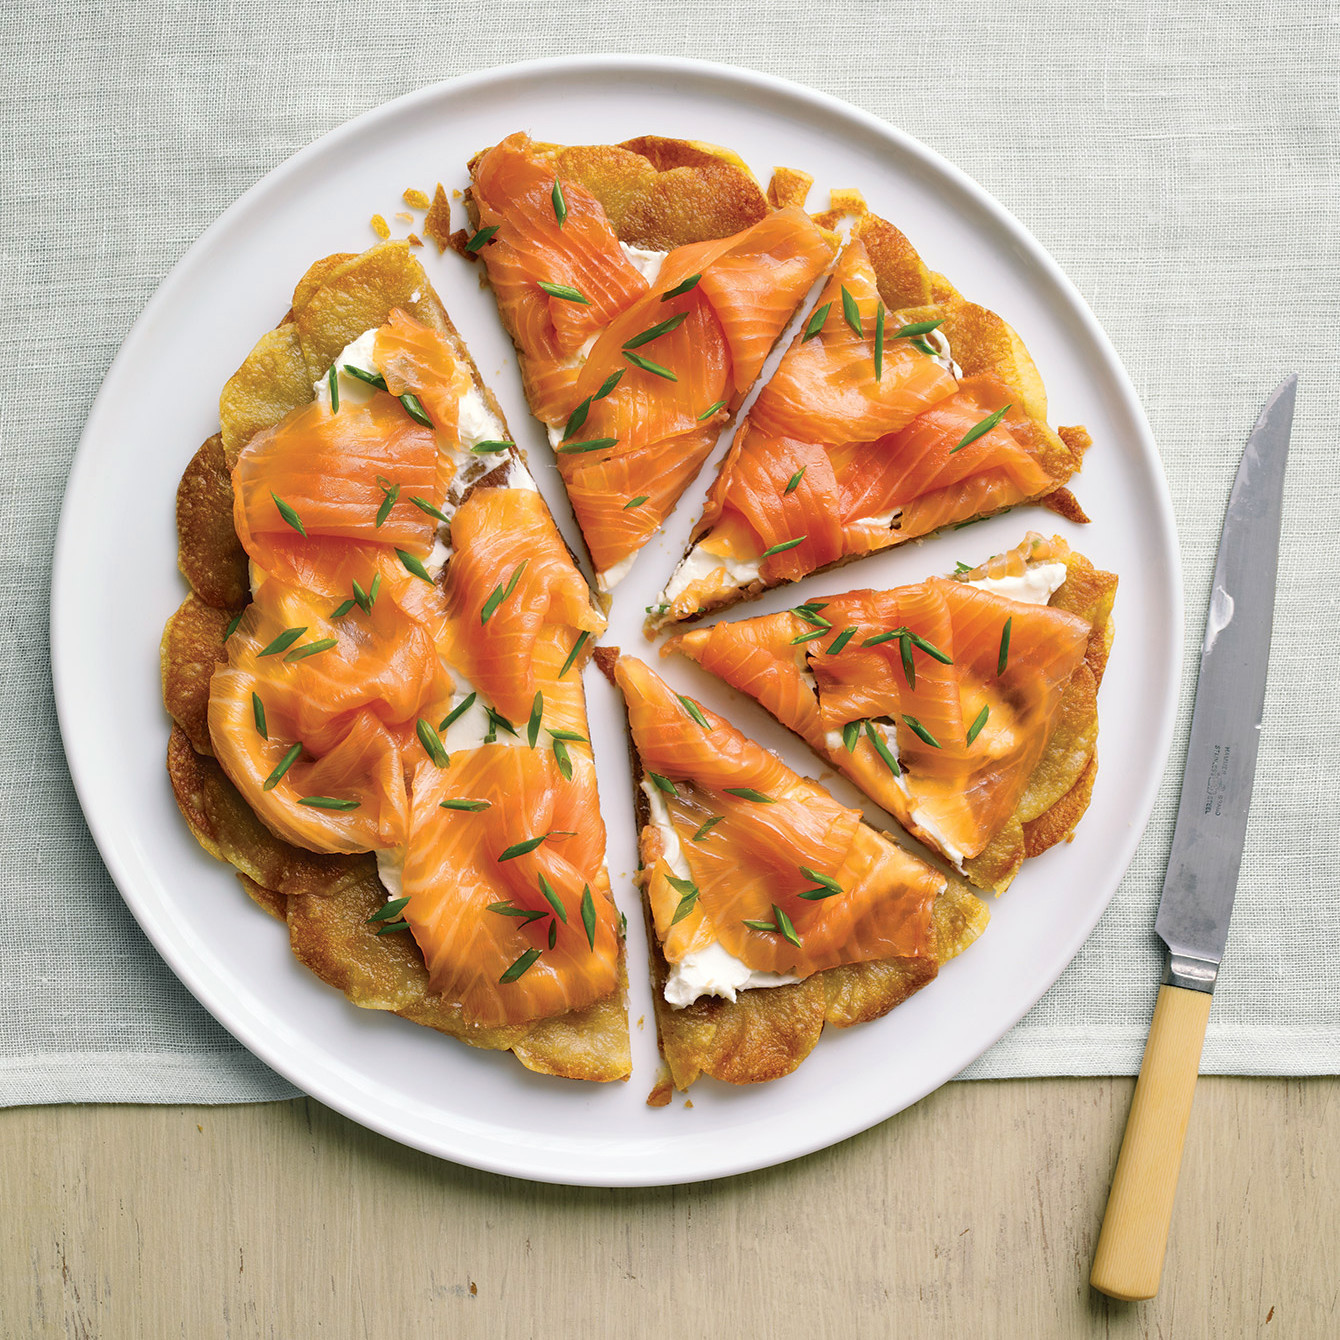 Martha Stewart Christmas Appetizers
 Sublime Smoked Salmon Appetizers for Your Next Soiree